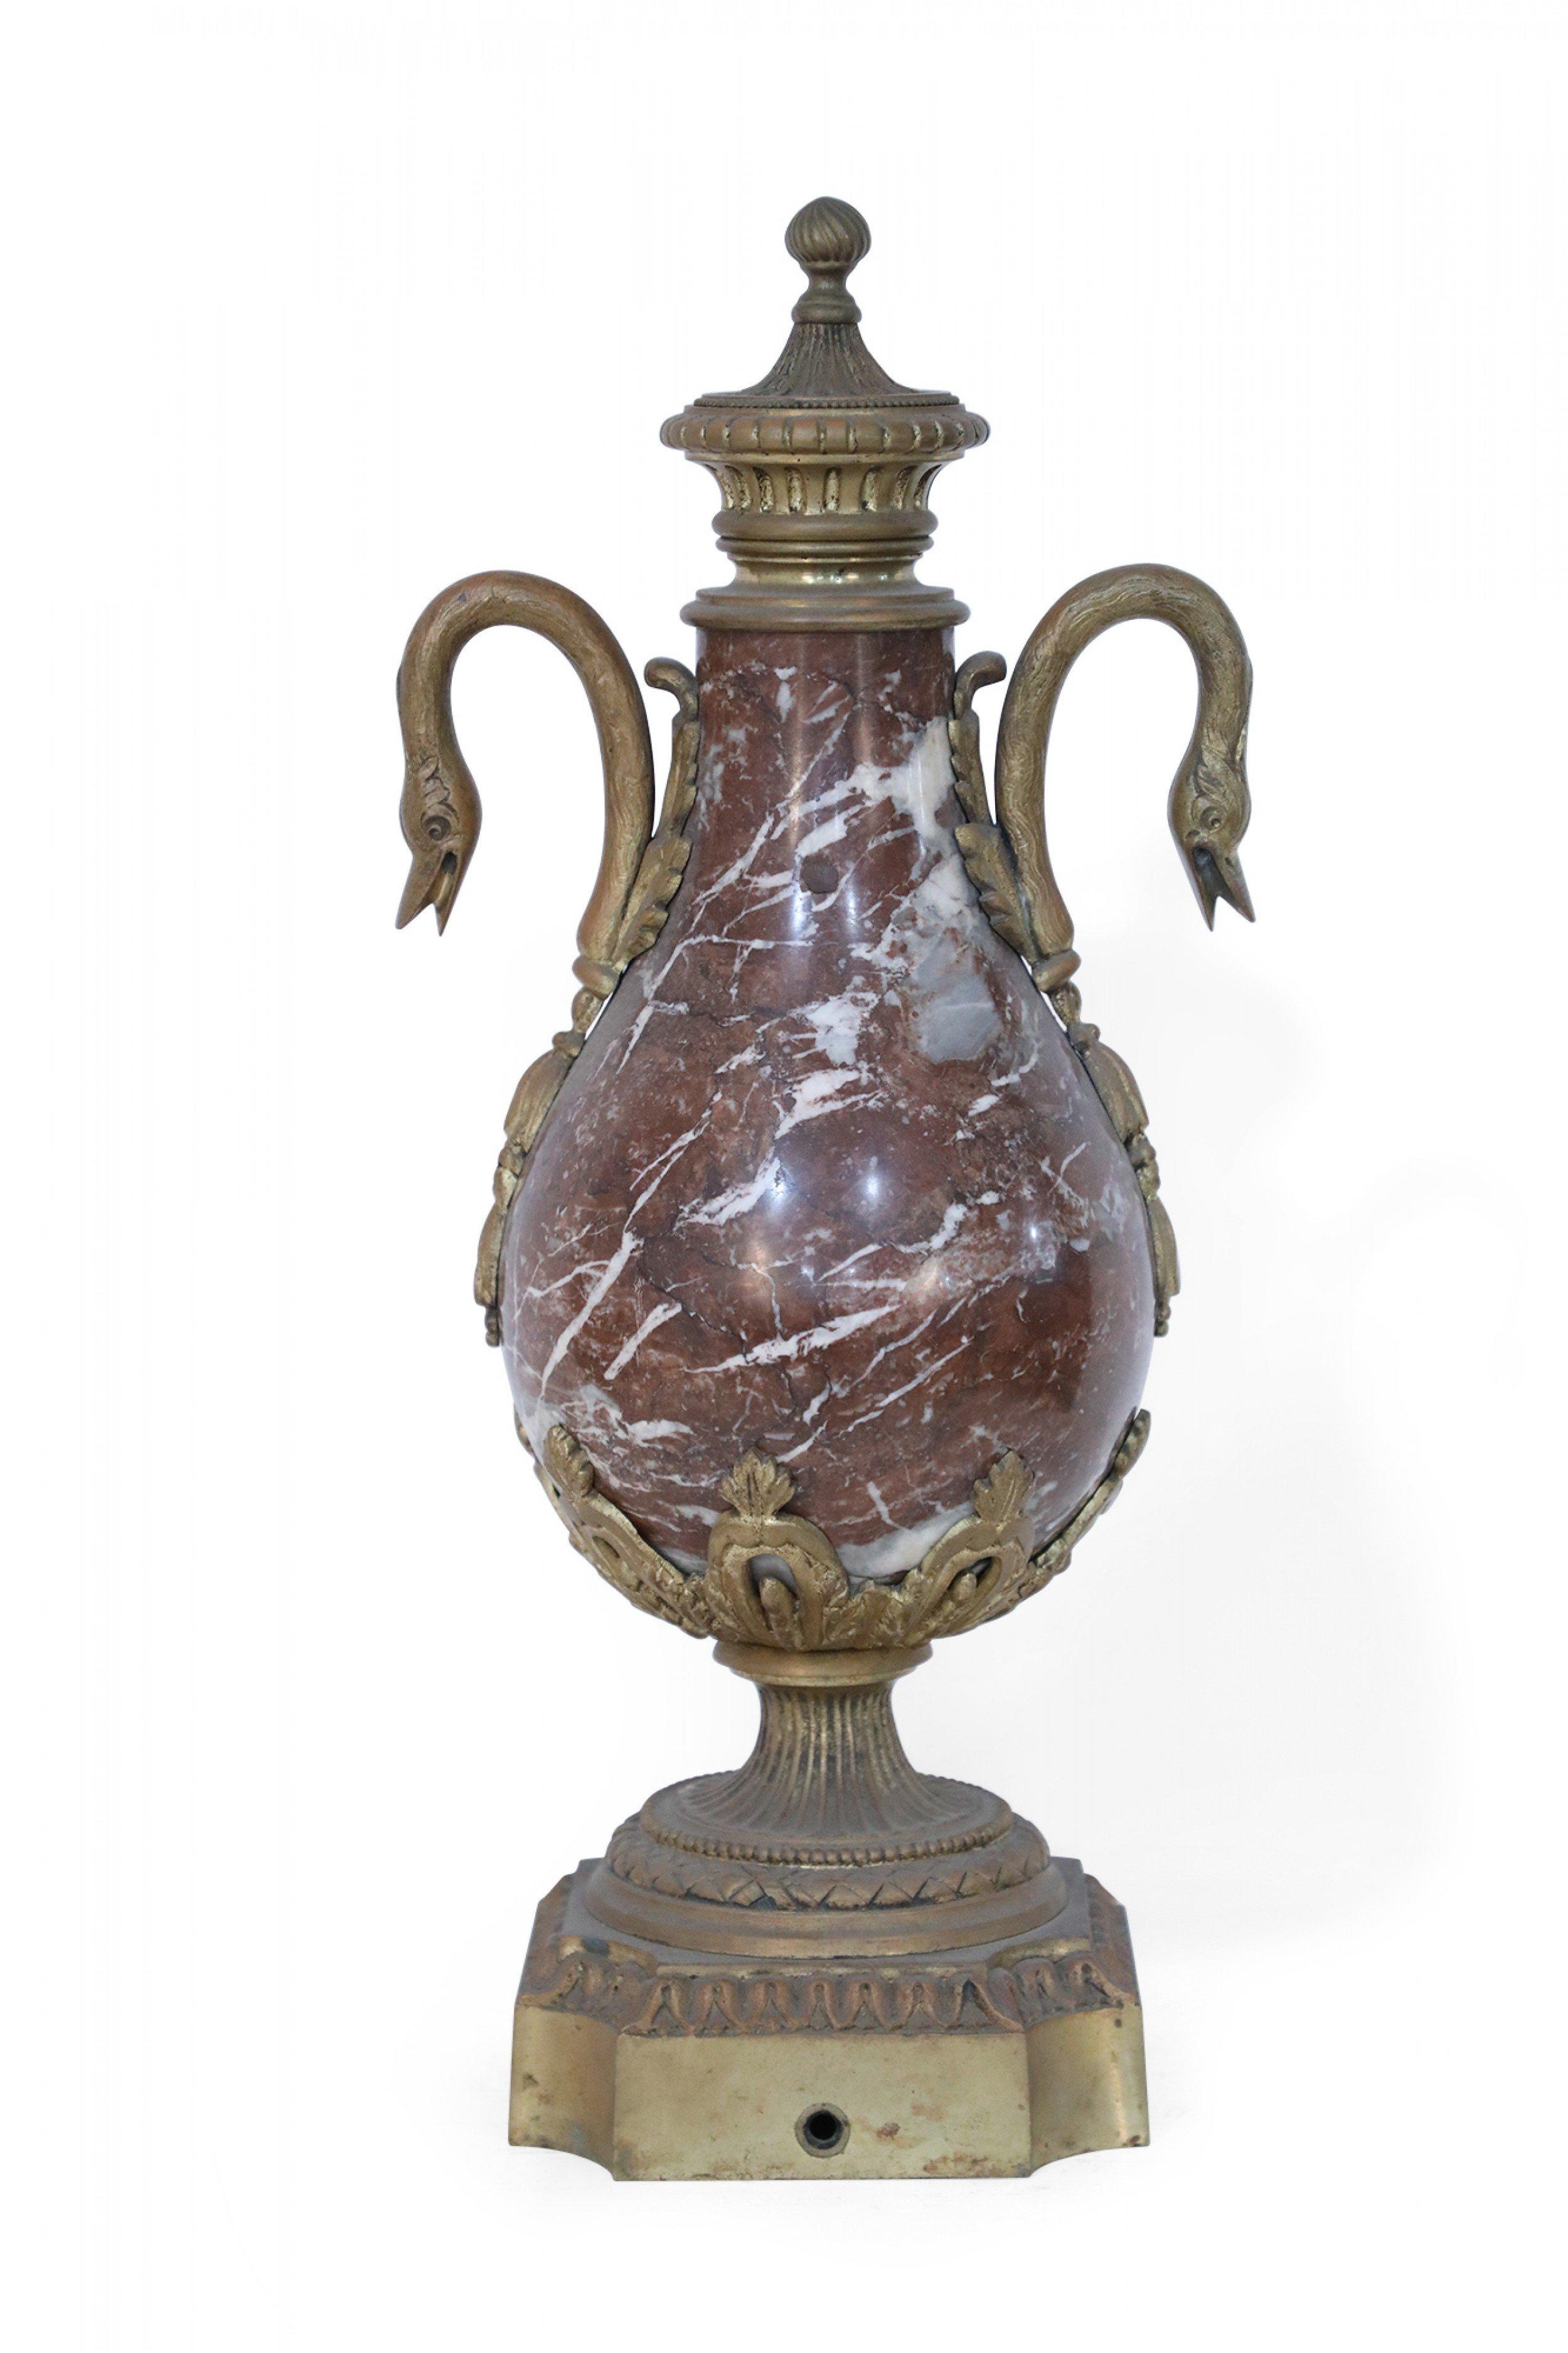 Pair of French Neoclassical decorative urns made from globular, burgundy marble bodies nestled within decorative bronze cradles held by square bases, accented in two swooping bronze duck handles and topped with ornate bronze finials (PRICED AS PAIR).